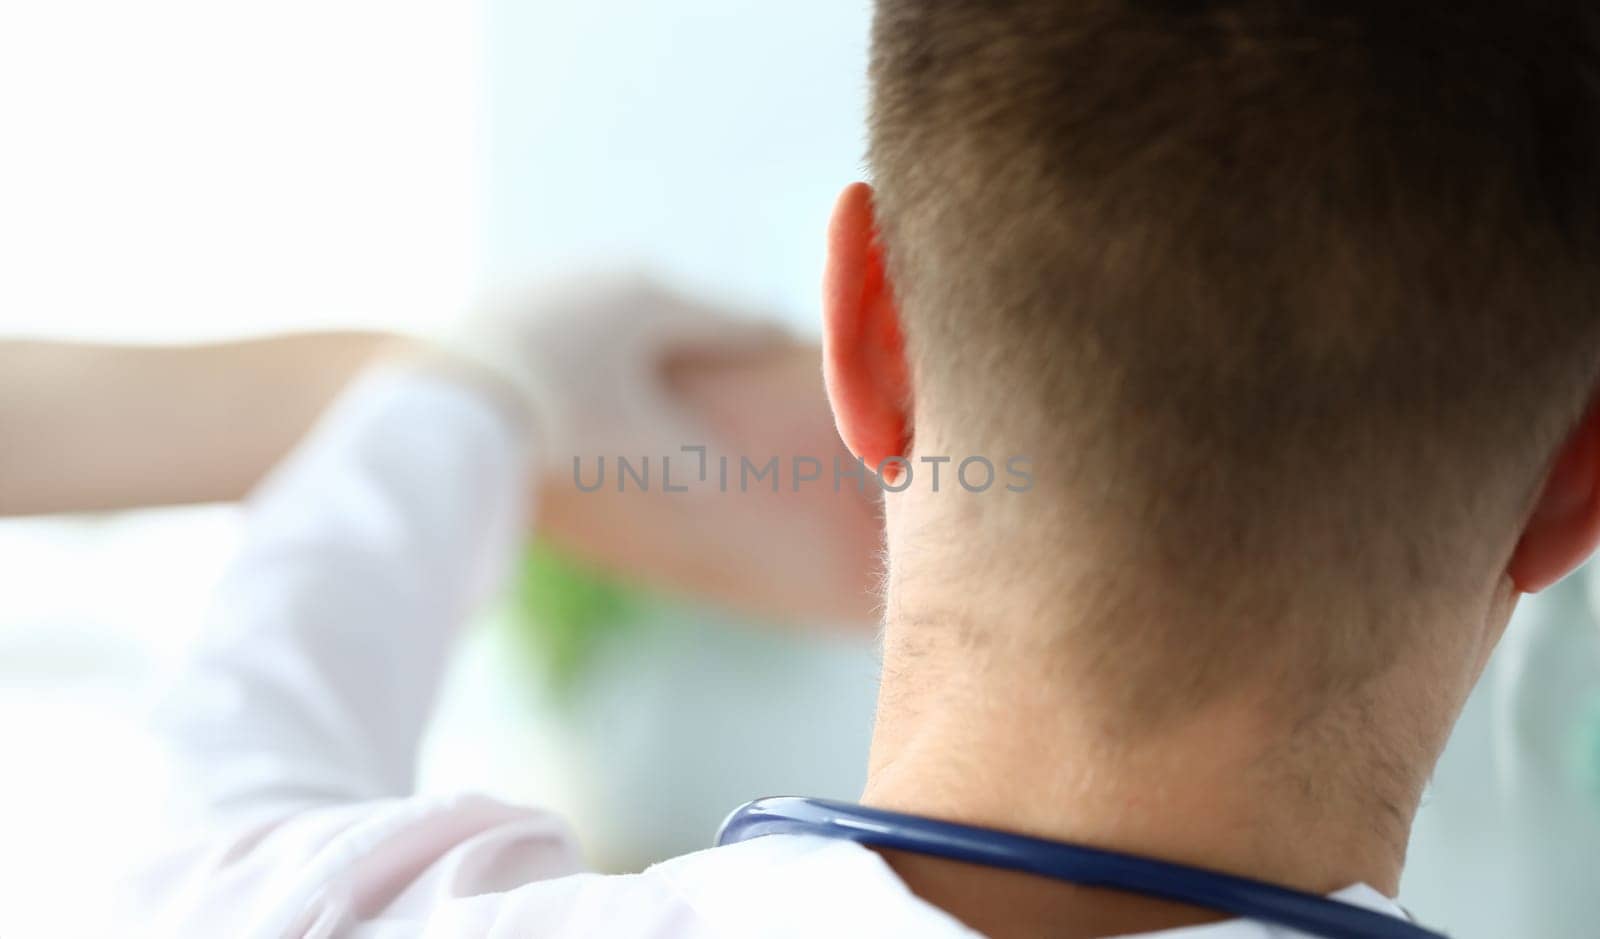 Rear view doctor in gloves examining patients skin. Allergy to medicine or fungal infections. Affordable modern health care. Doctor stands in white coat with stethoscope on her neck